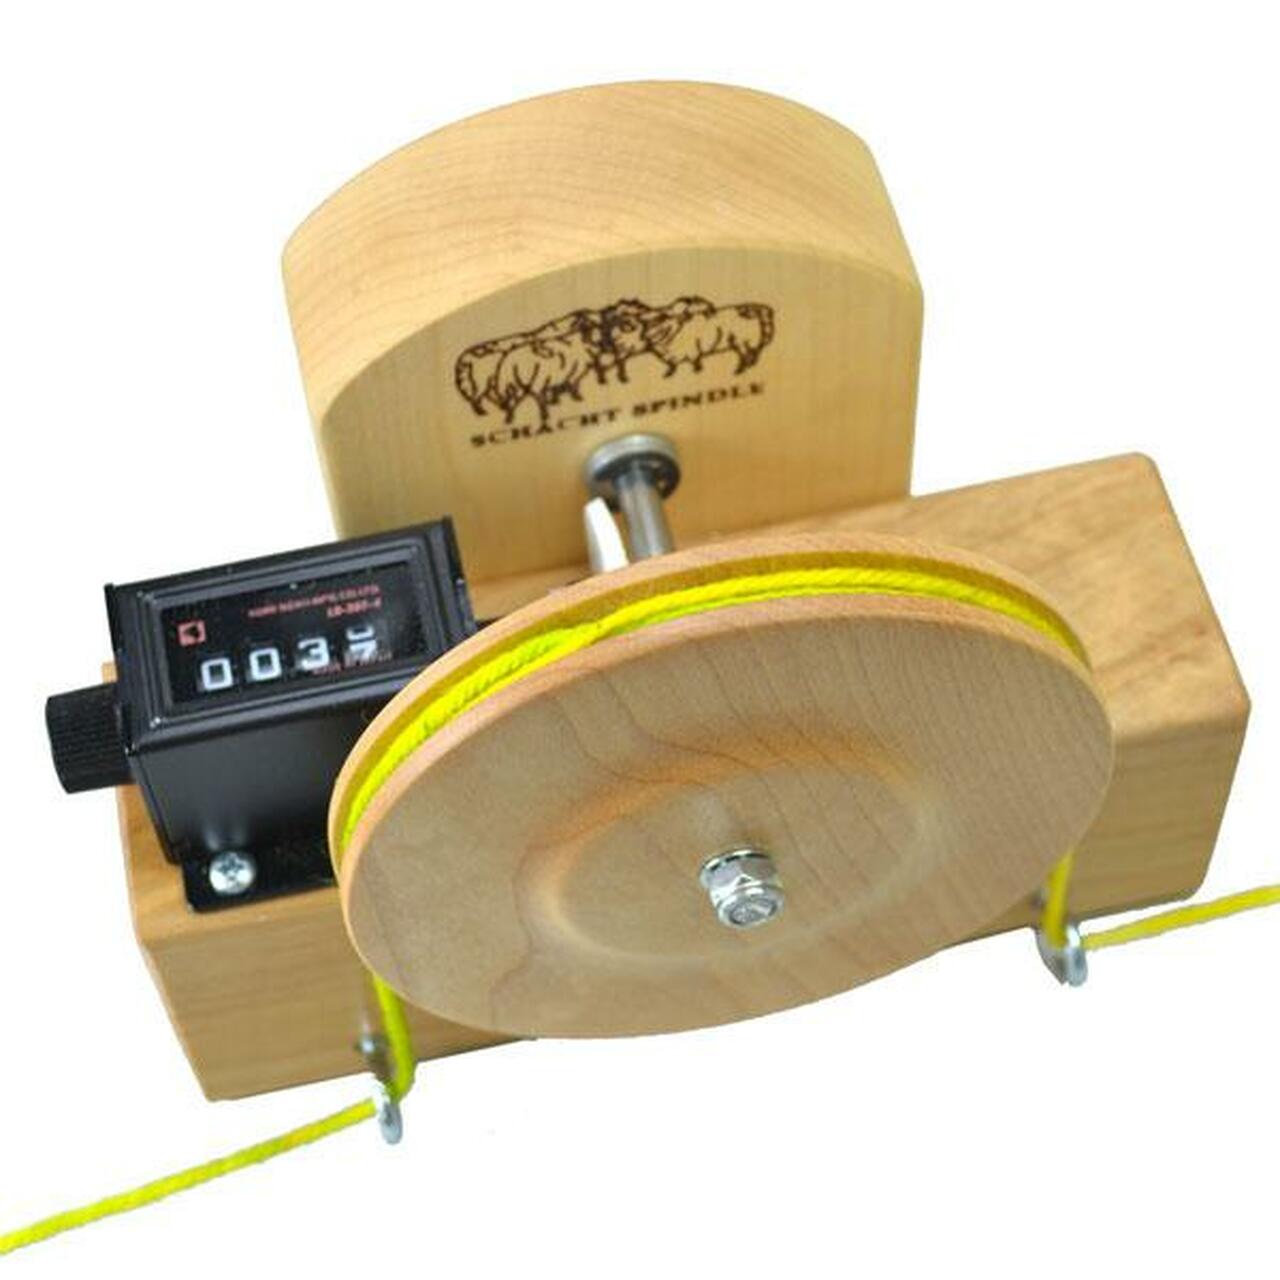 Schacht Yardage Counter (Imperial & Mertric)-Yardage Counter-Schacht-Imperial-Revolution Fibers